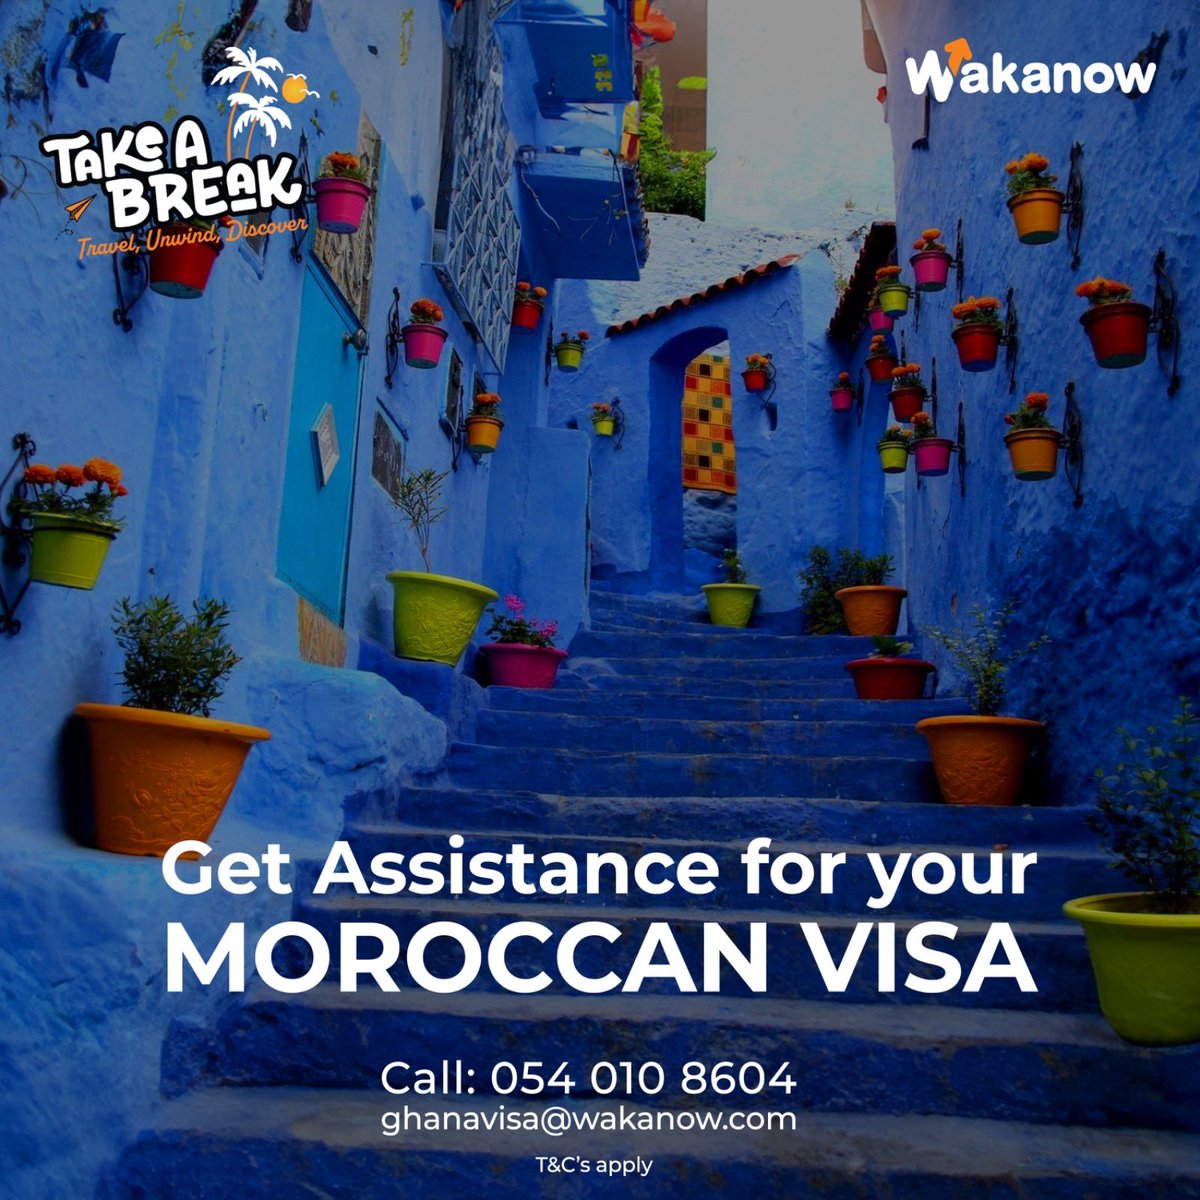 Discover Morocco with us this summer!! 
Call 0540108604 to get your visa now!

#VisitMorocco #VisaAssistance #TakeABreak